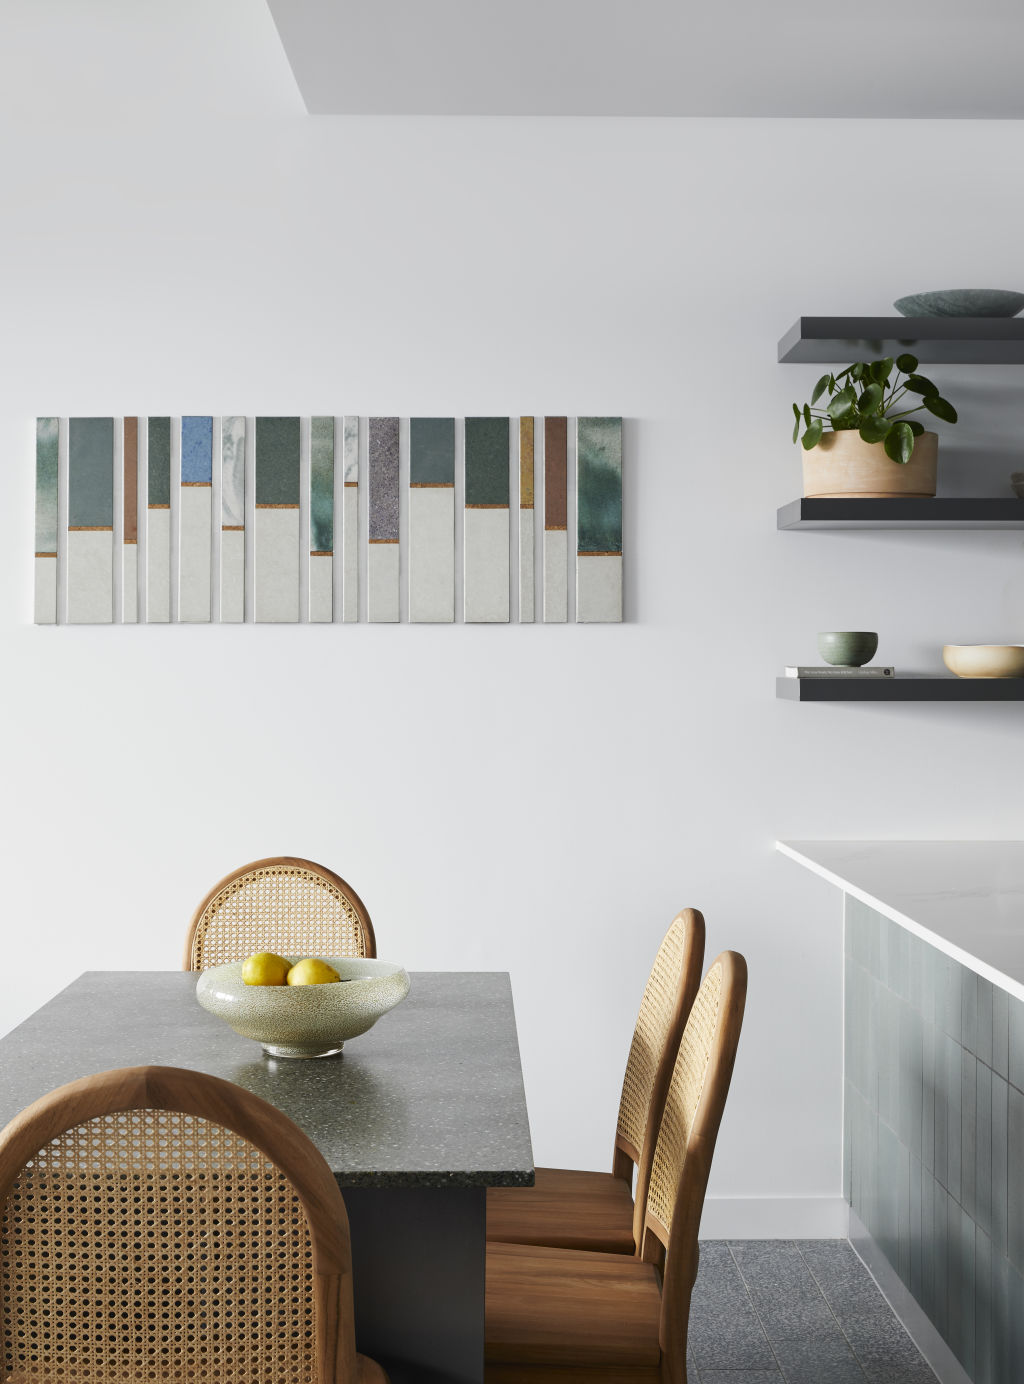 An art work and dining table from green ceramics. Photo: Supplied